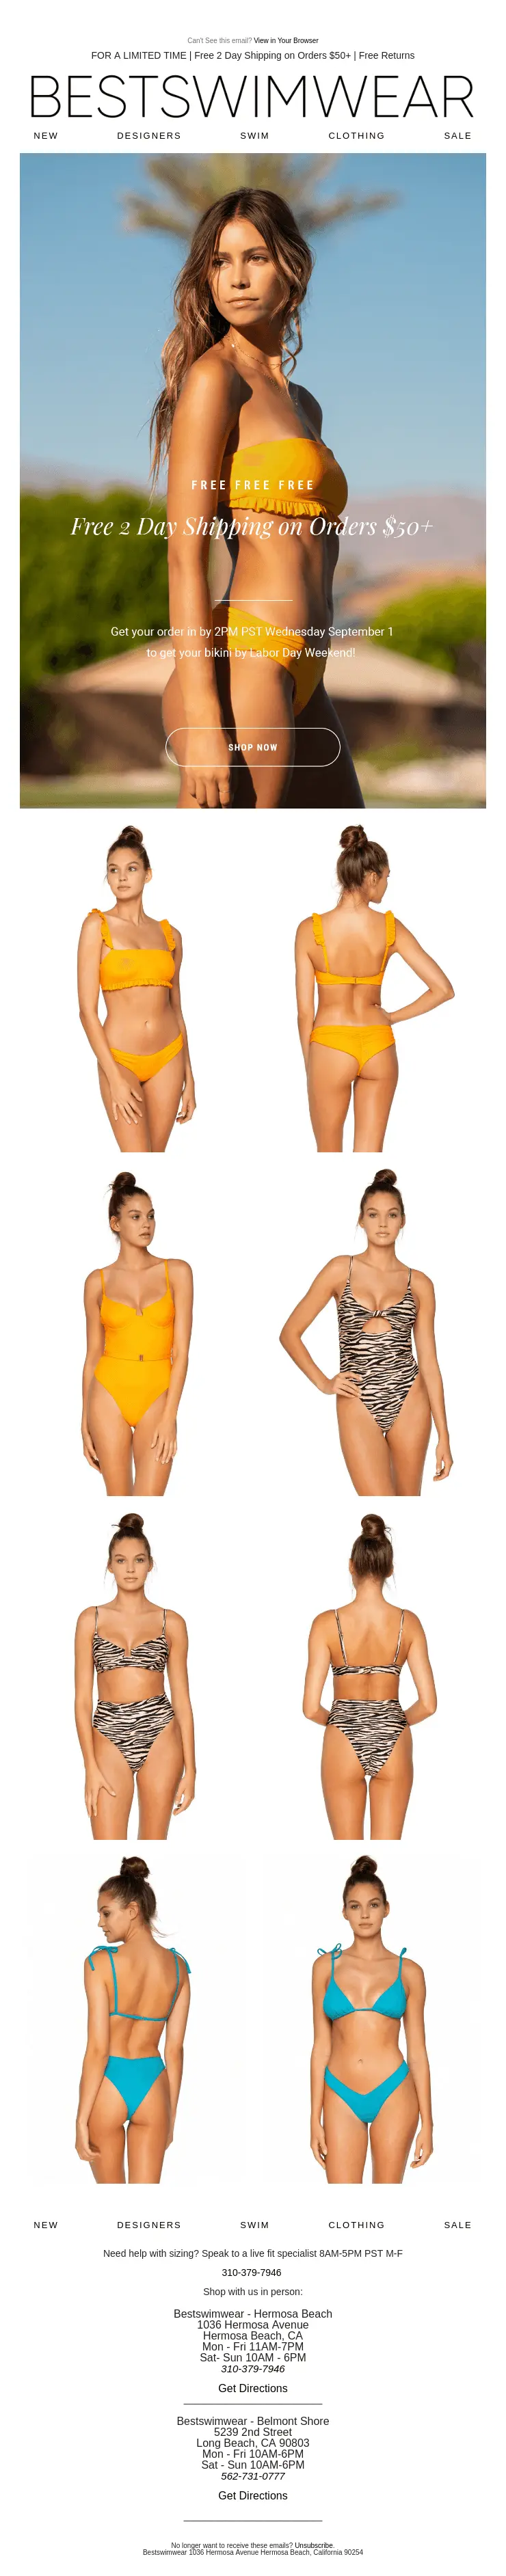 Image shows a marketing email from Best Swimwear